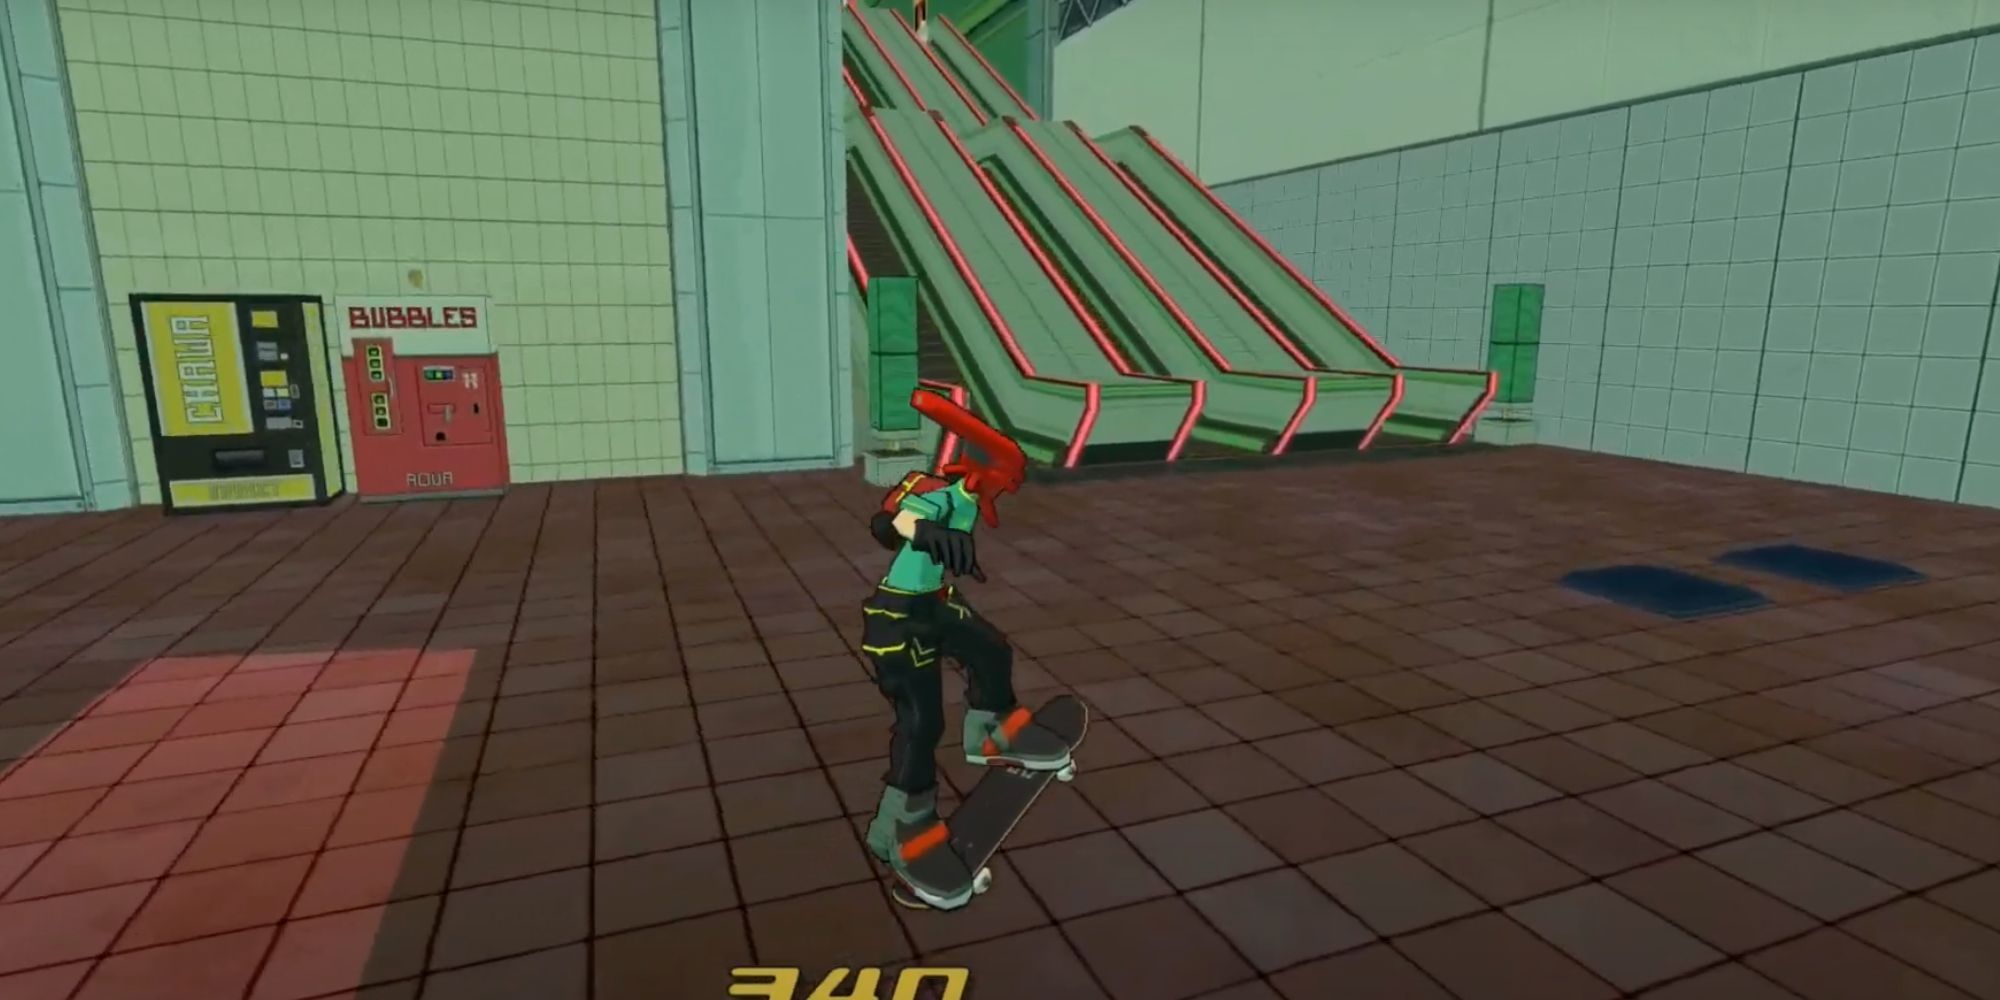 A player with red headgear does an ollie on a skateboard.